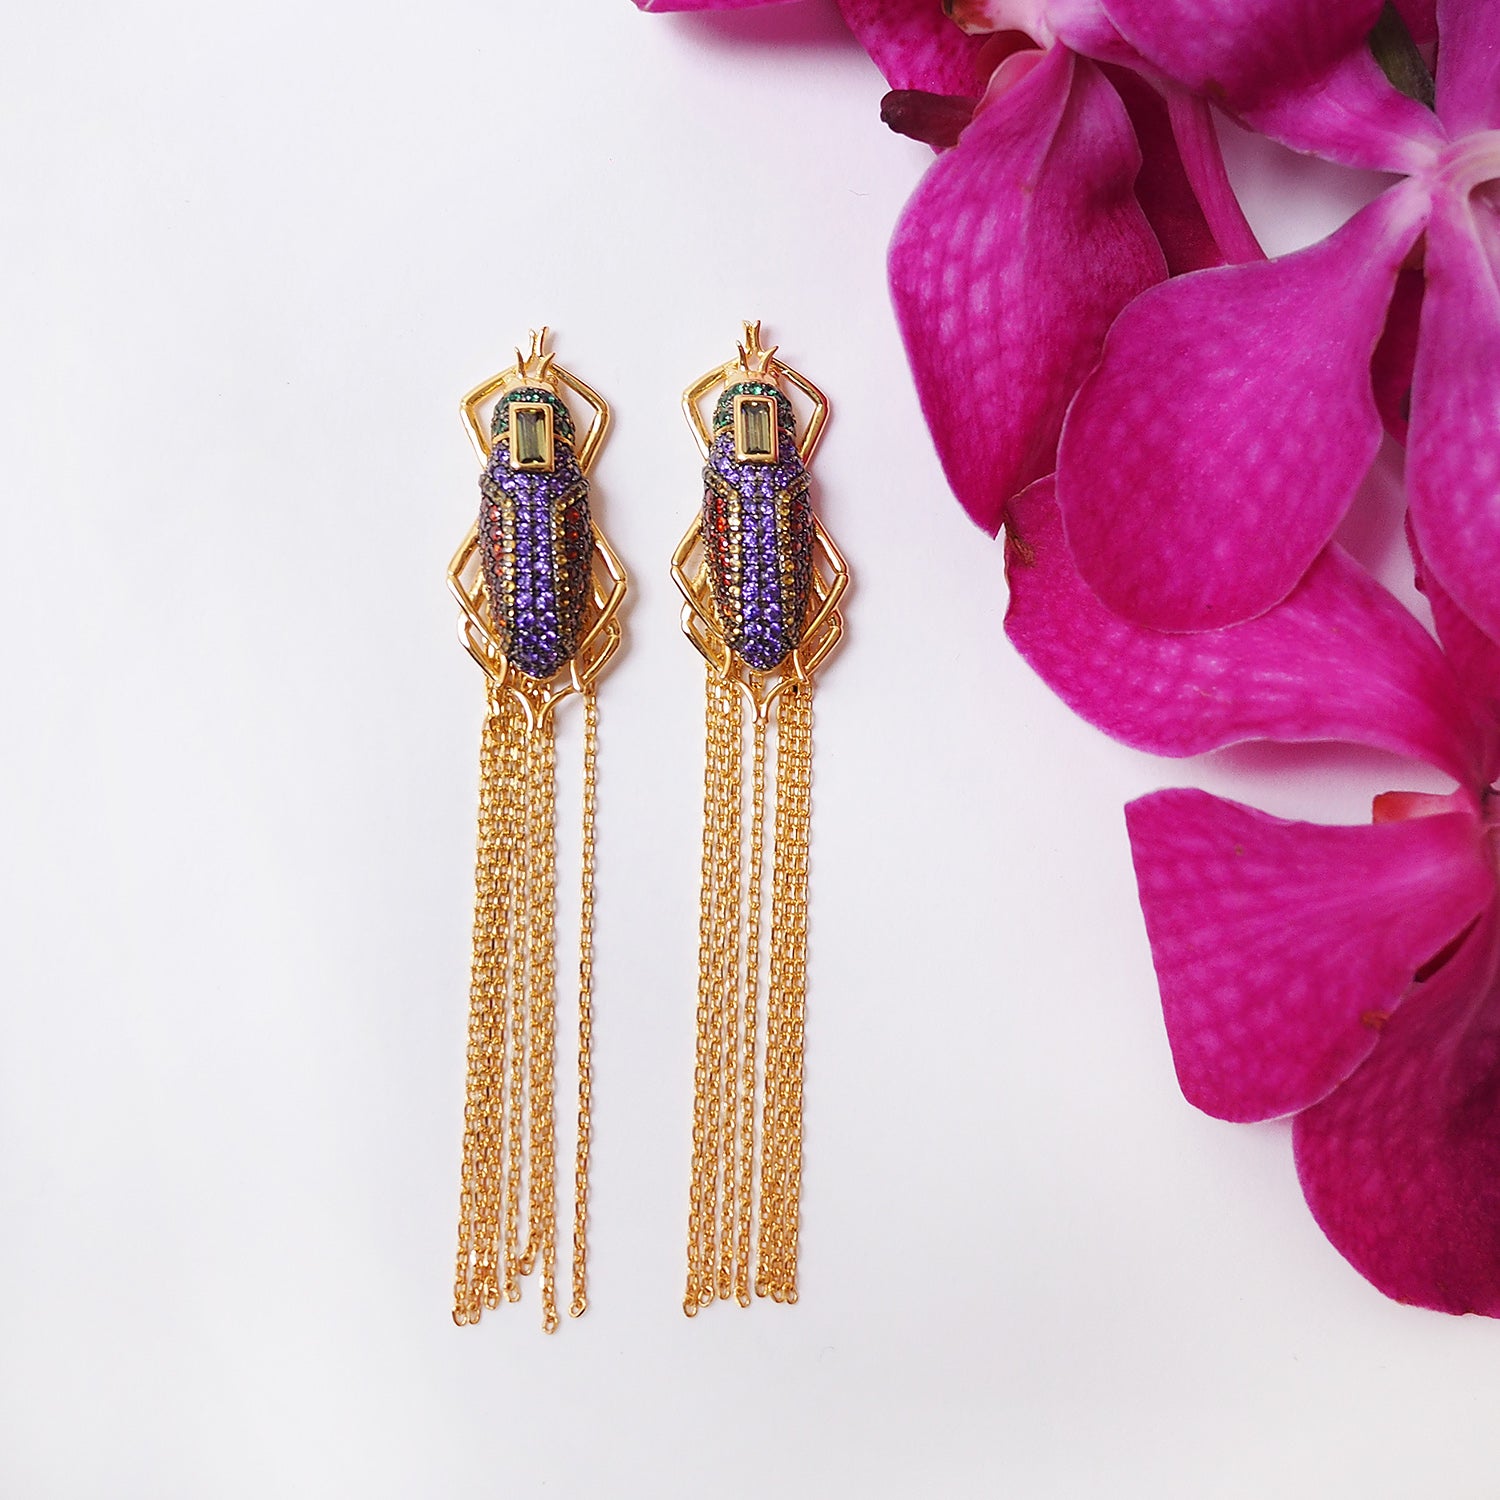 sliver gold plated beetles scarab earrings with colourful CUBIC ZIRCONIA gems stone and tassel from Hong Kong